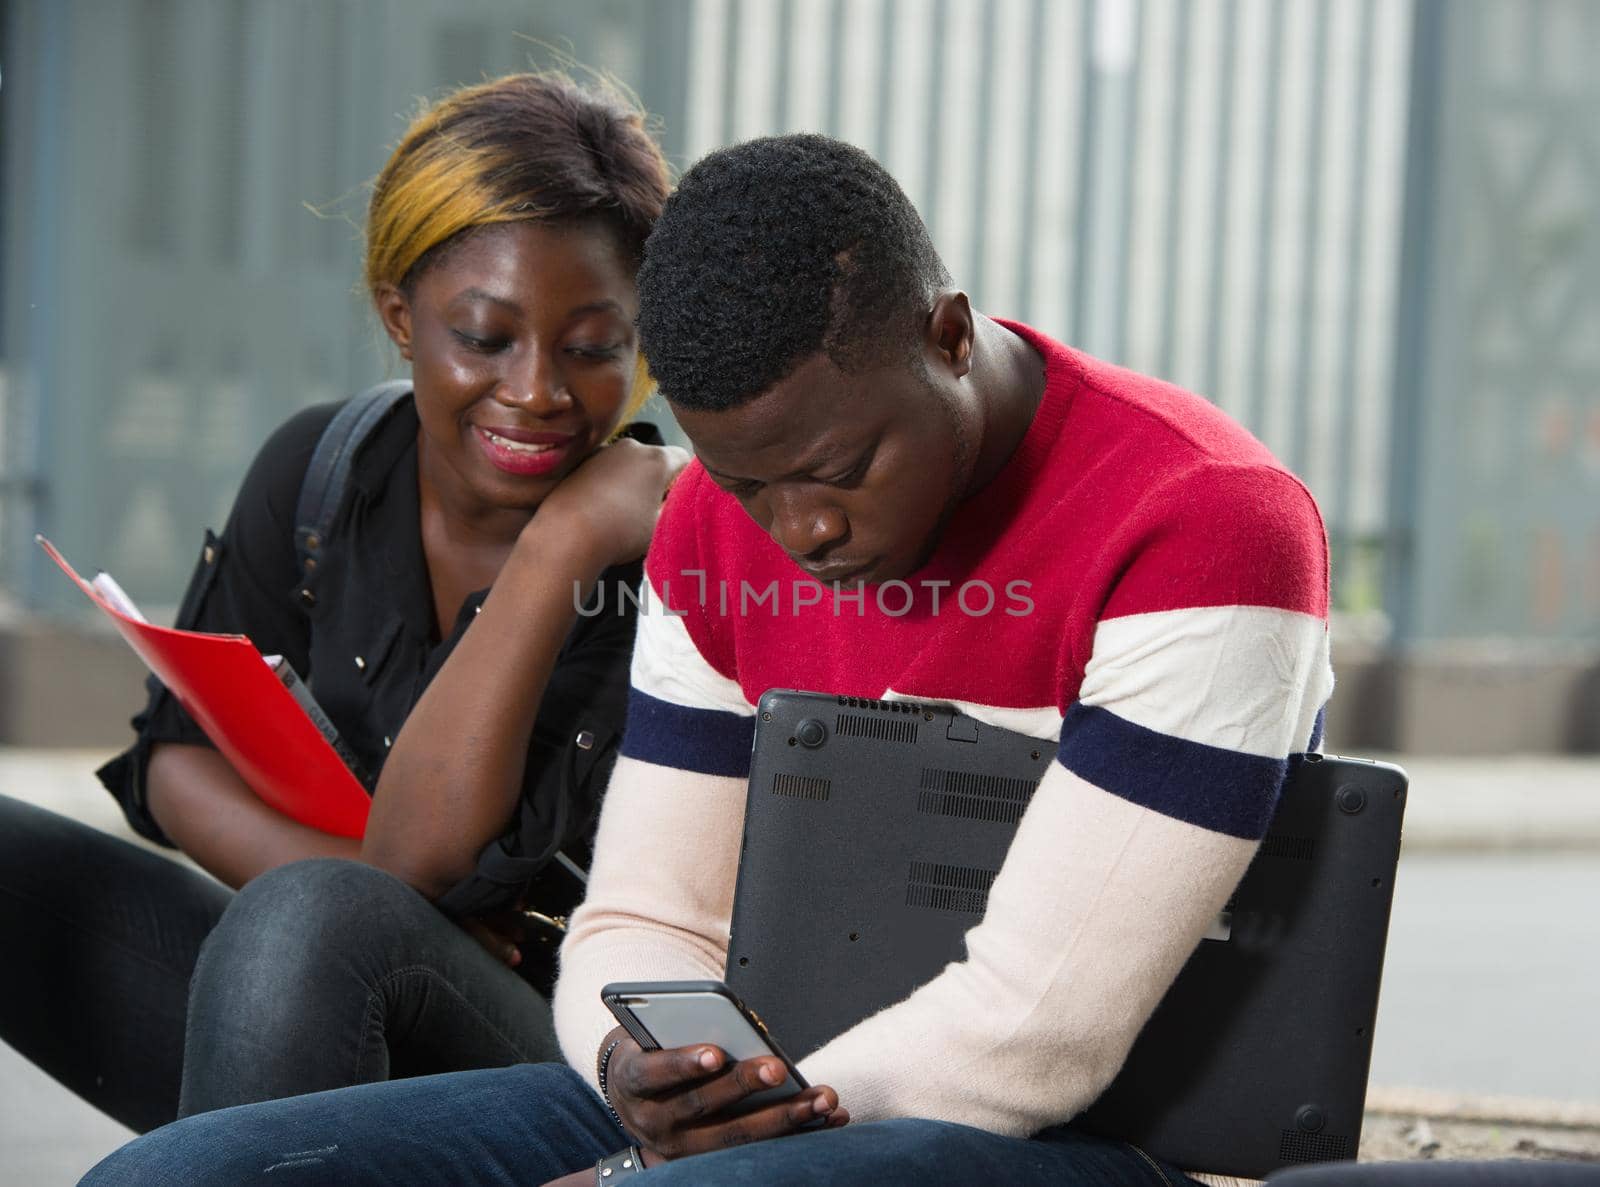 two young students outdoors studying with one cell phone, smiling girl sitting next to and looking at the mobile phone screen